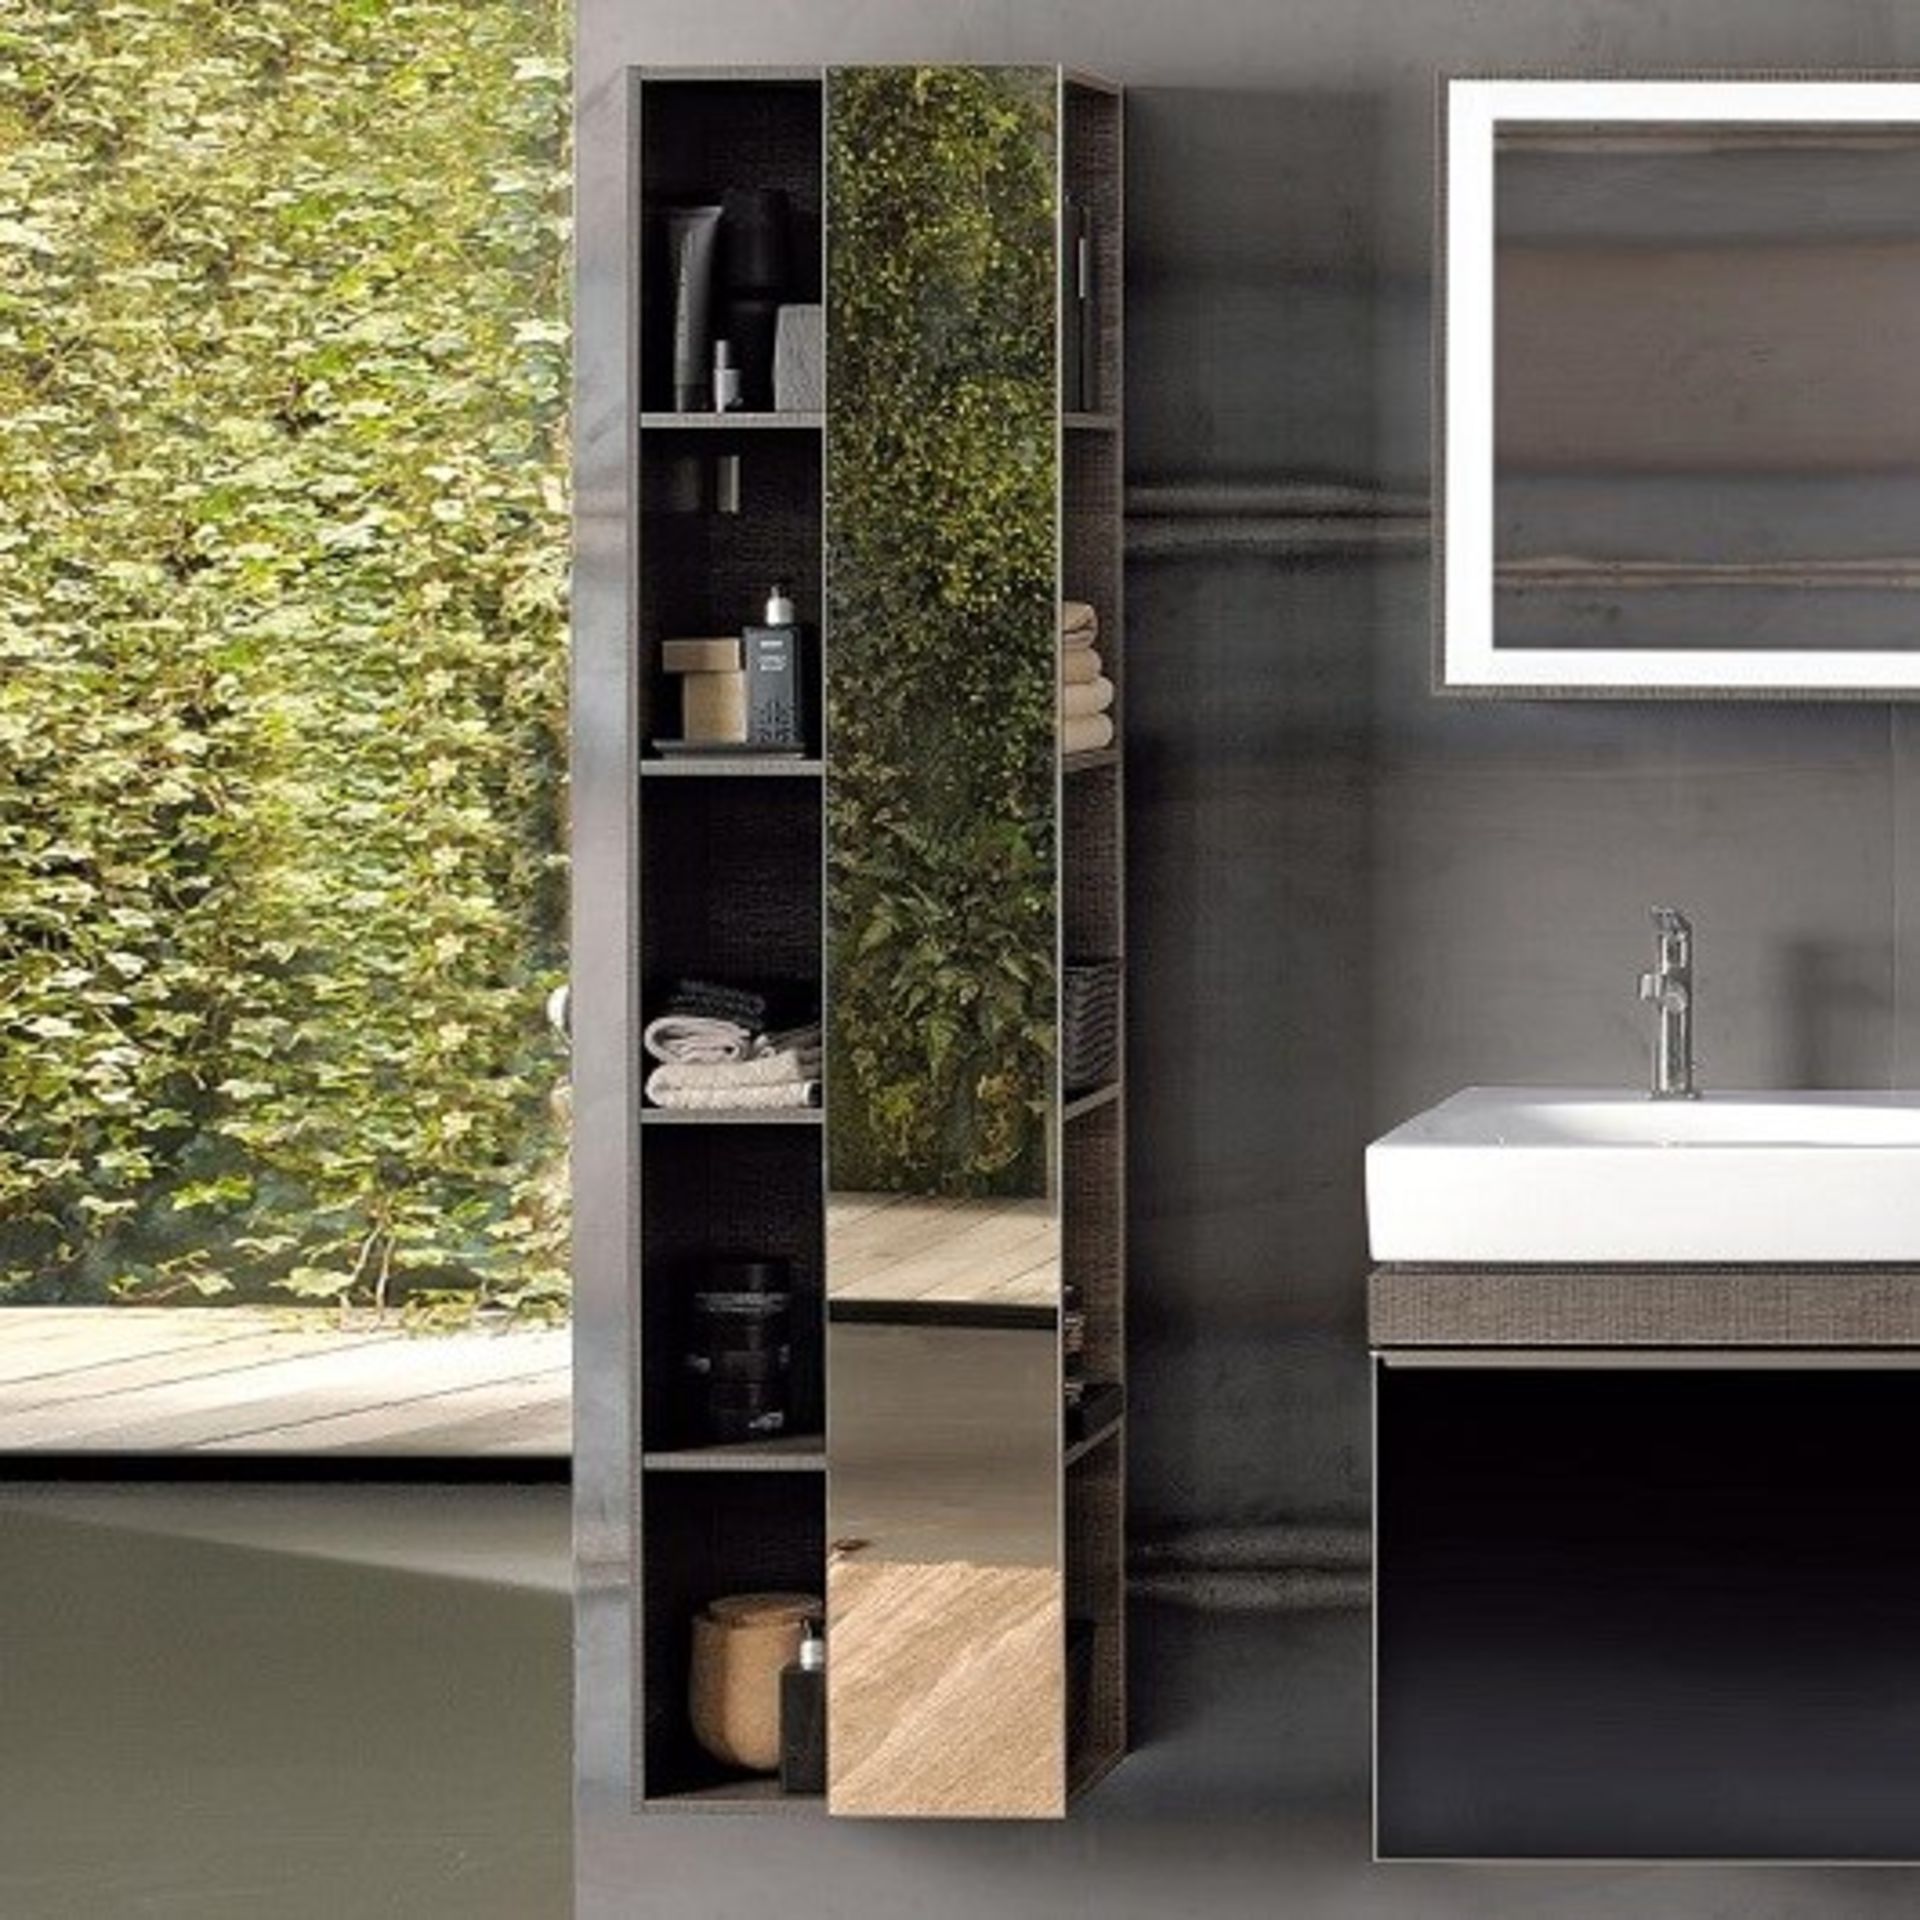 (PC4) 1600mm Keramag Citterio Grey/Brown Shelves with Mirror Tall Cabinet. RRP £865.99.Wood st...(